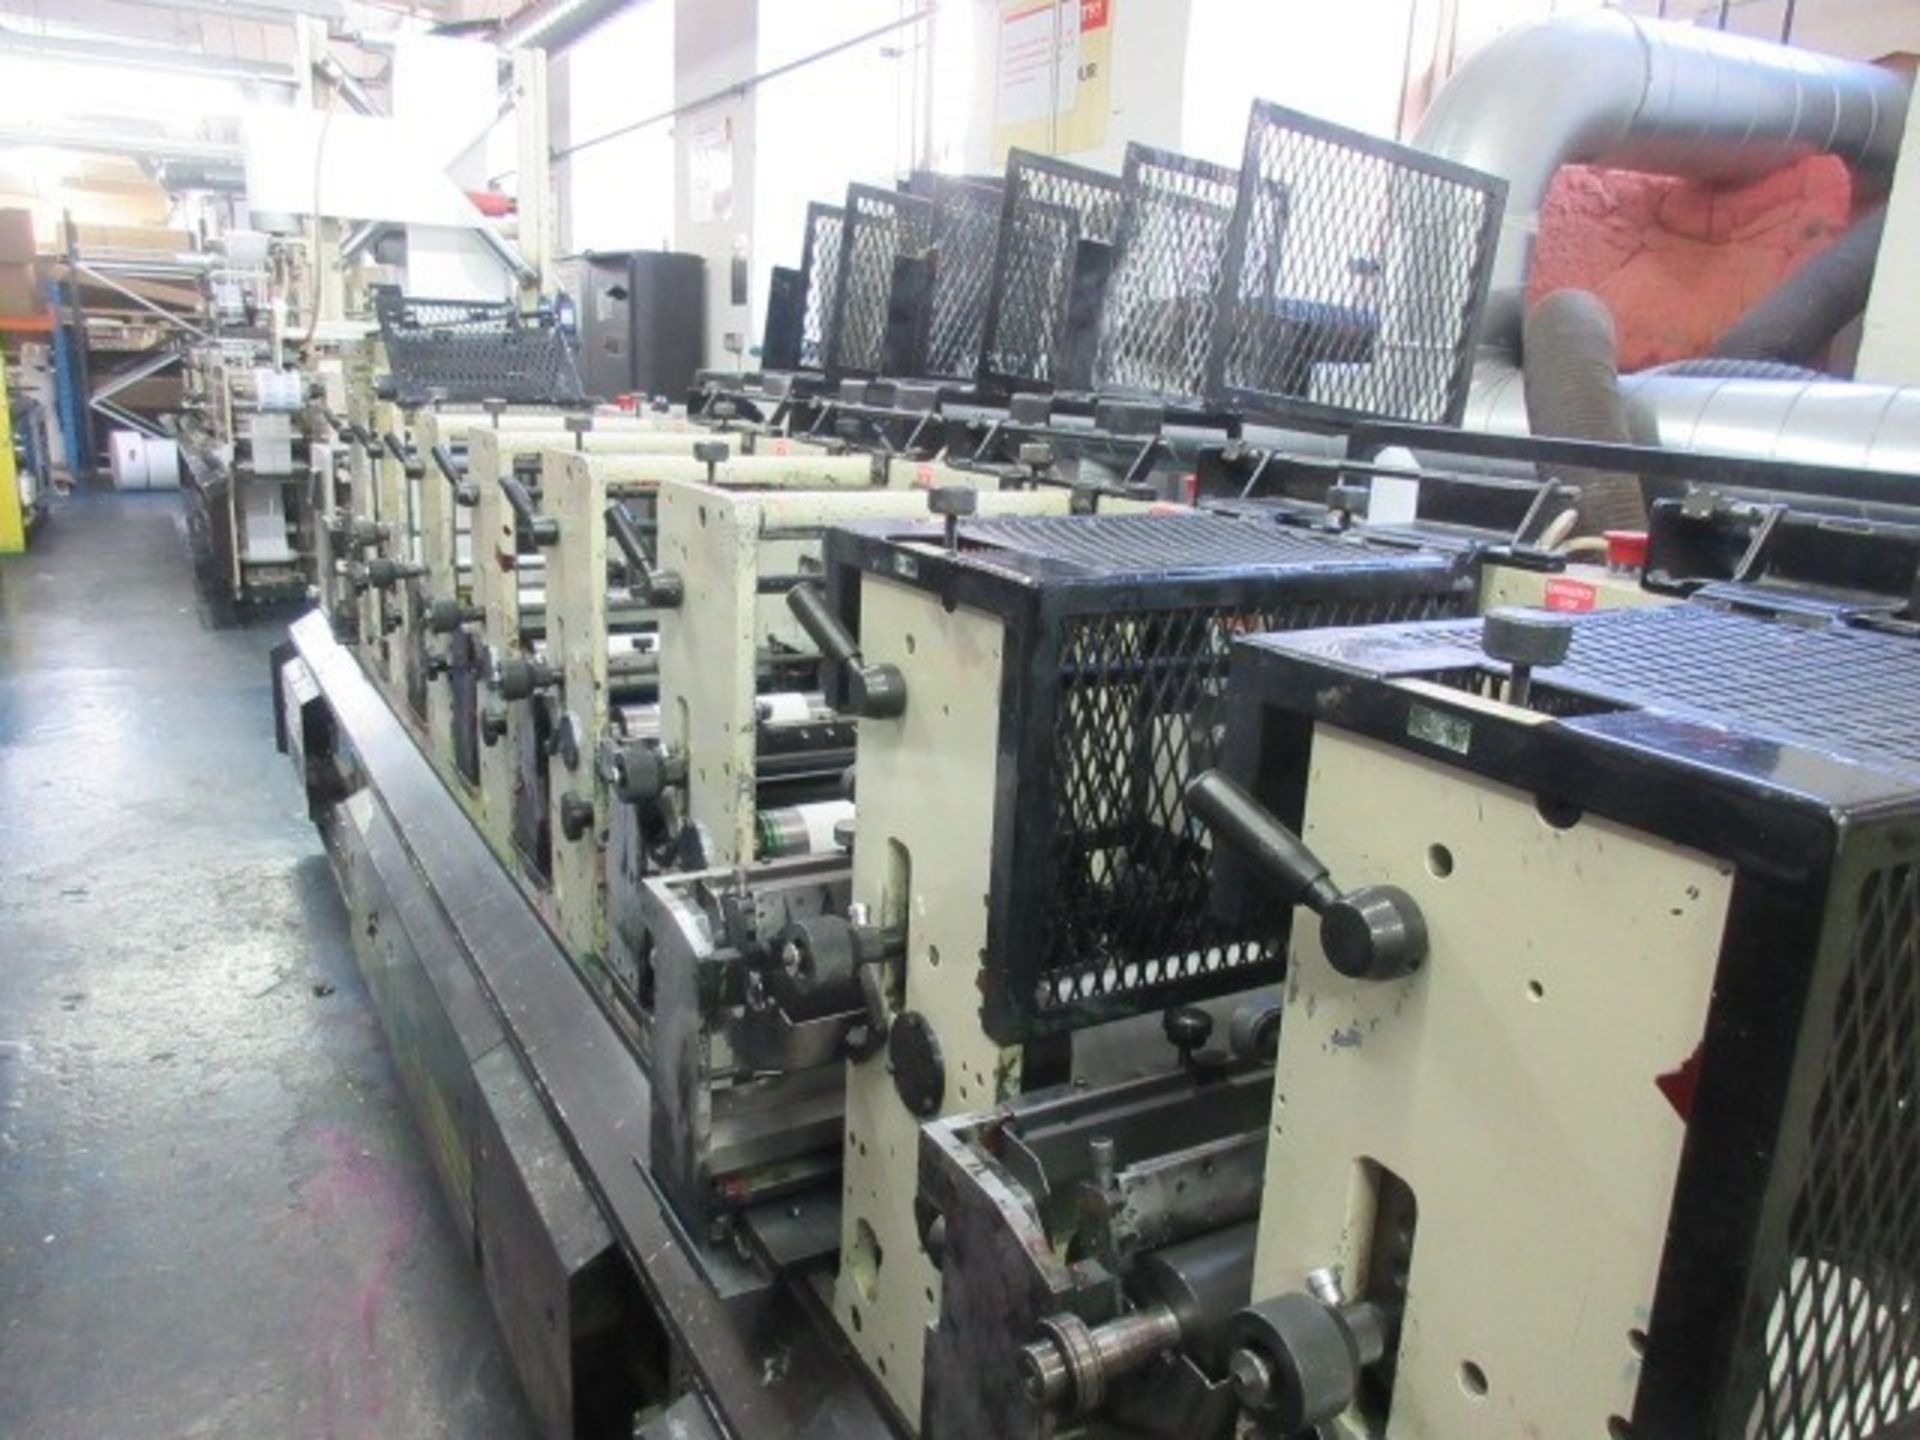 Mark Andy 2200-10F 10” 8 colour flexographic label printing press. Serial no: 1260086 (2002) - Image 228 of 383